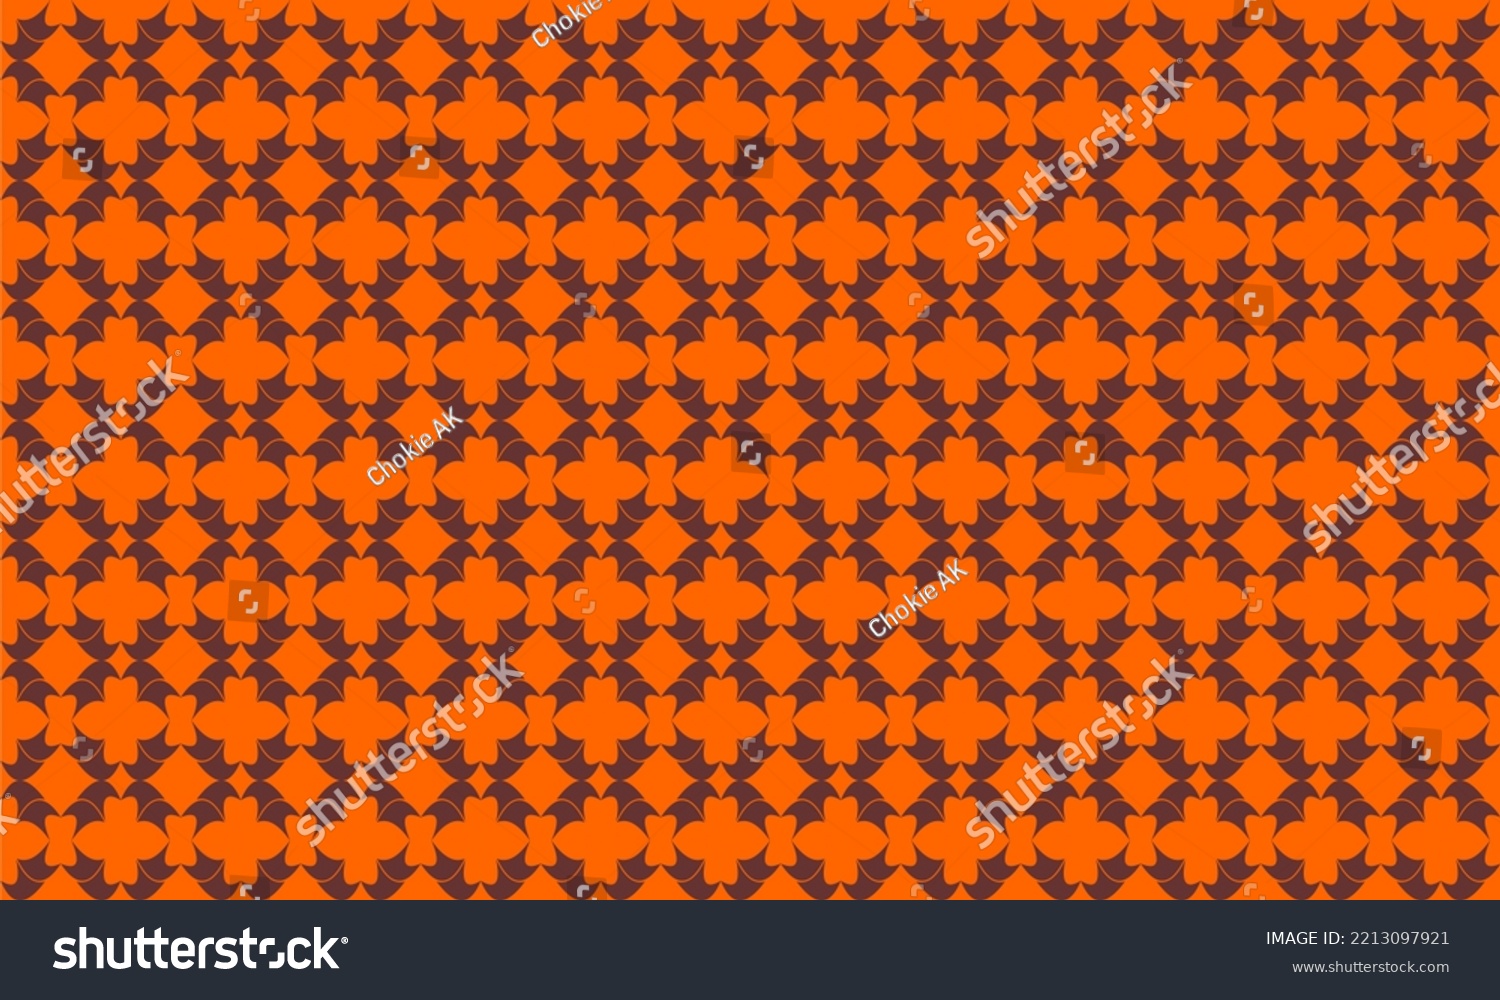 SVG of Vector Background. You can use it for wall motifs, pillowcases, book covers, stickers and much more svg